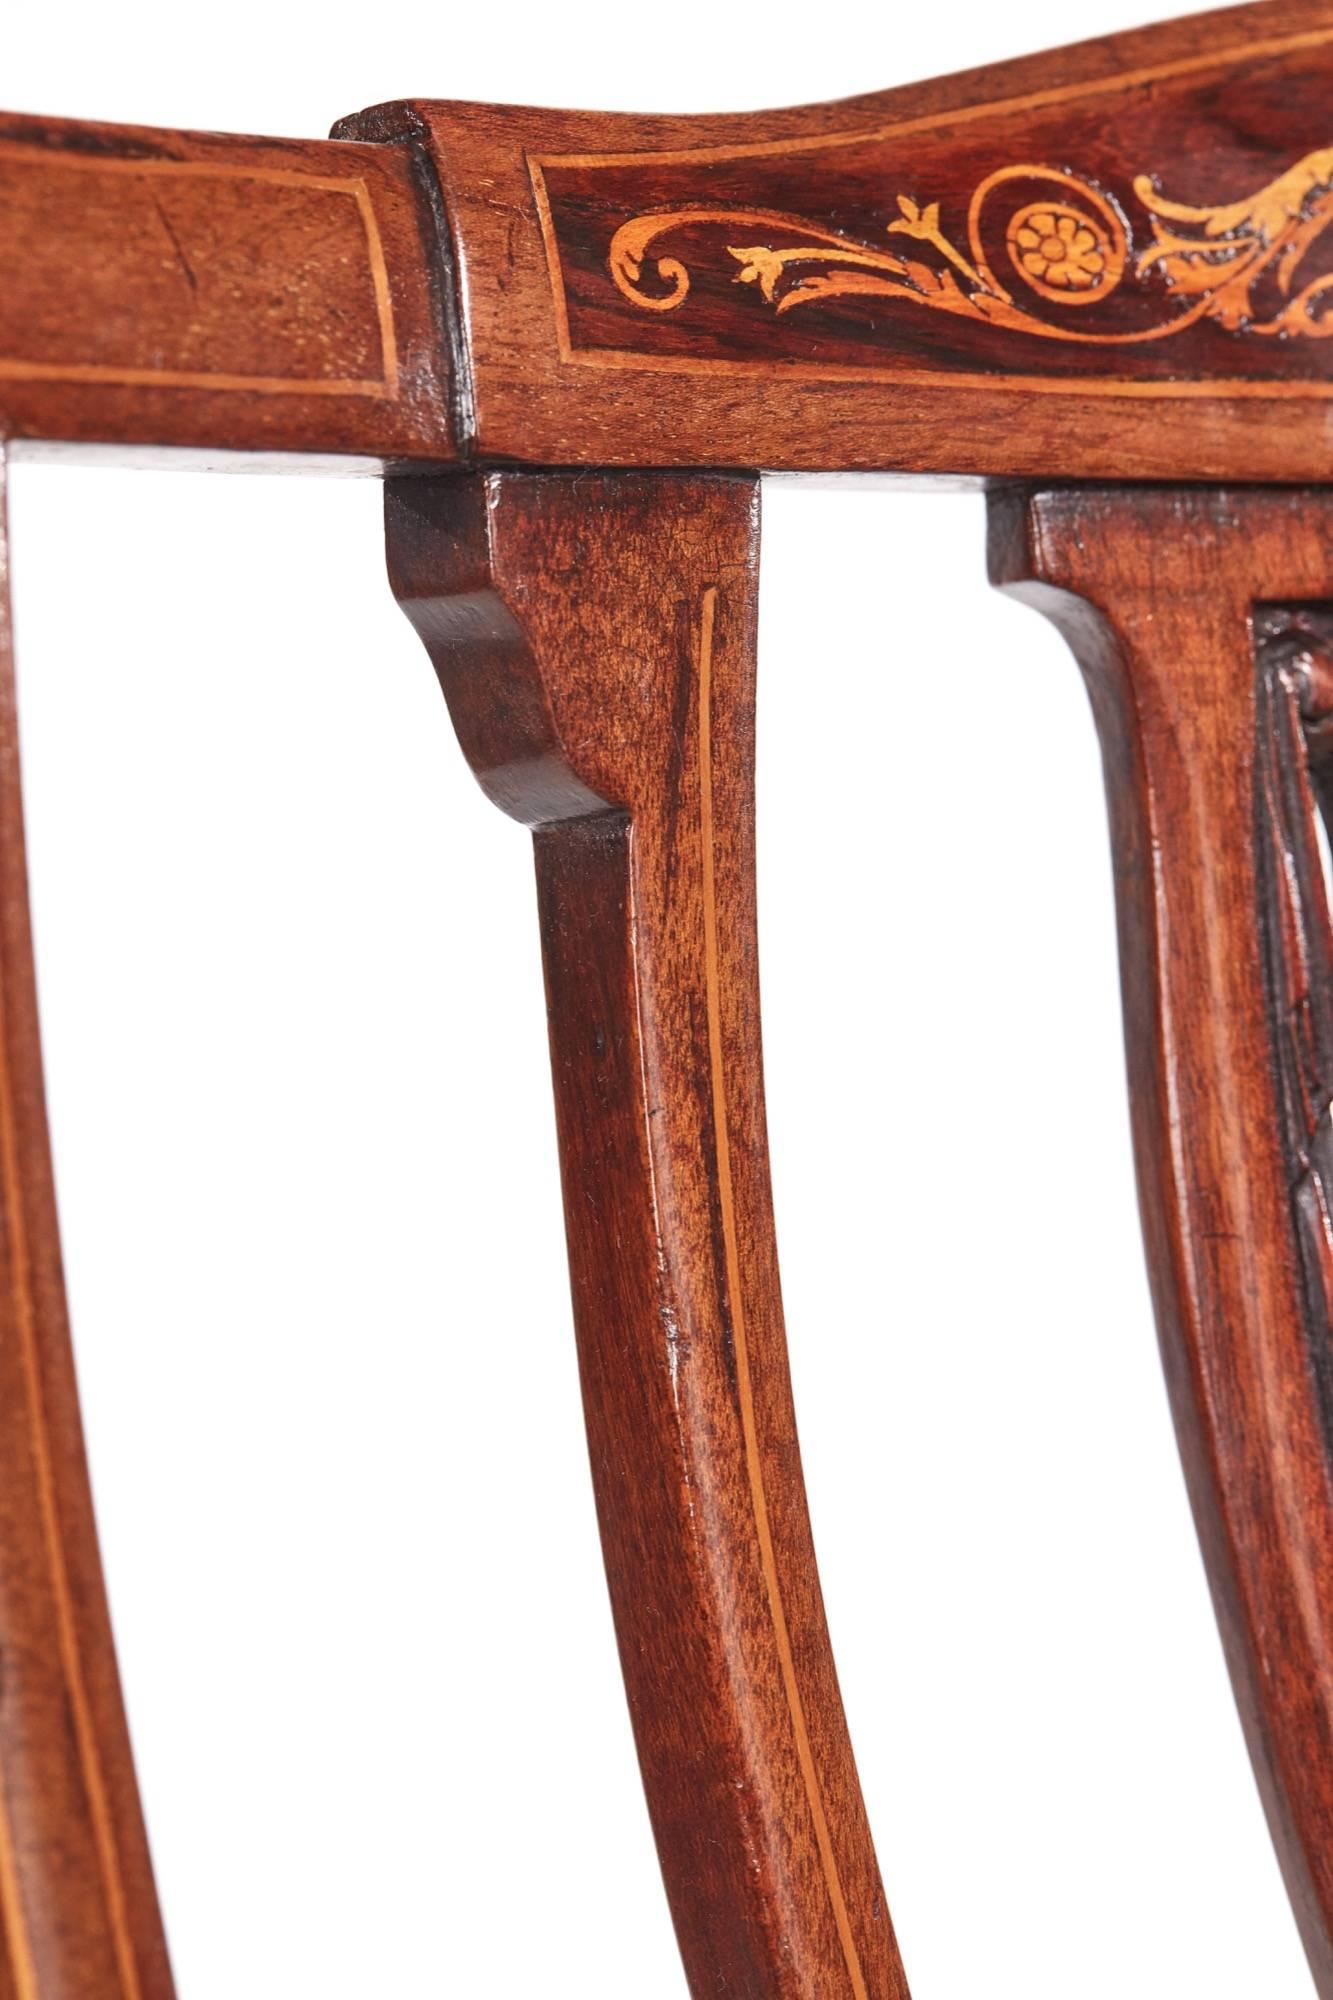 Set of four Edwardian mahogany and rosewood inlaid dining chairs, having a lovely inlaid shaped top rail, lovely inlaid shaped splats, serpentine front rail, standing on square tapering legs with spade feet to the front outswept back legs
Newly